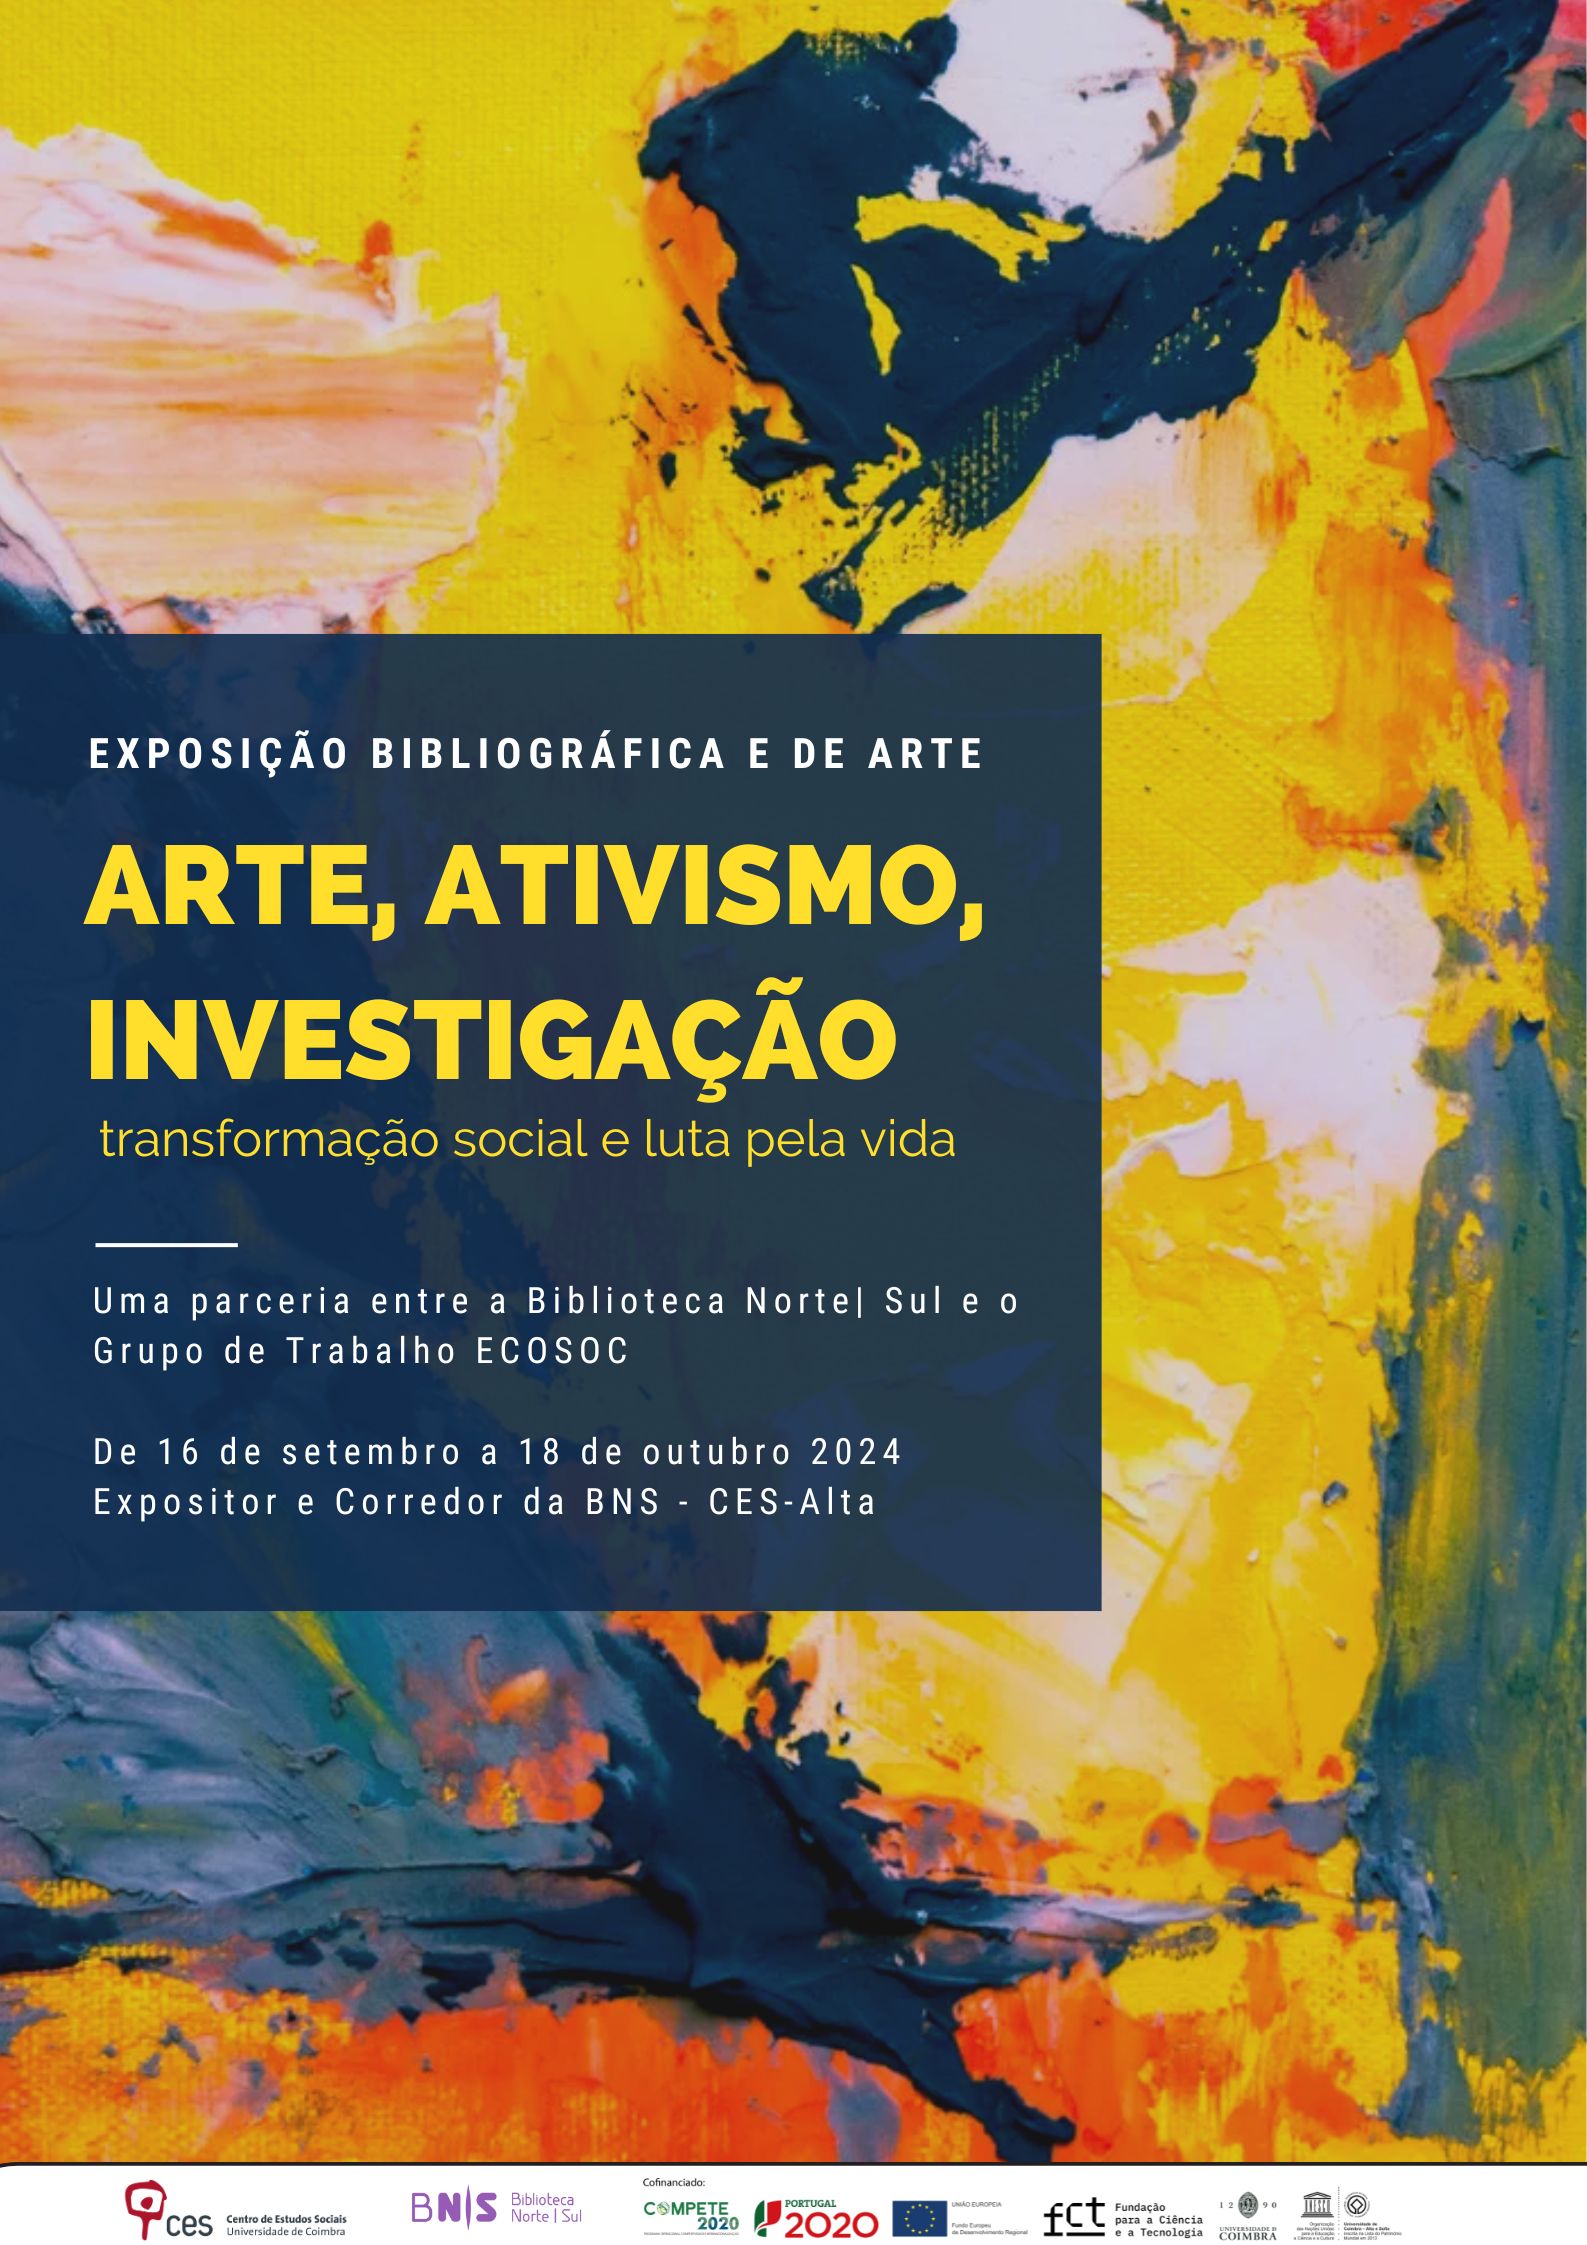 Art, activism, research: social transformation and the struggle for life<span id="edit_46130"><script>$(function() { $('#edit_46130').load( "/myces/user/editobj.php?tipo=evento&id=46130" ); });</script></span>